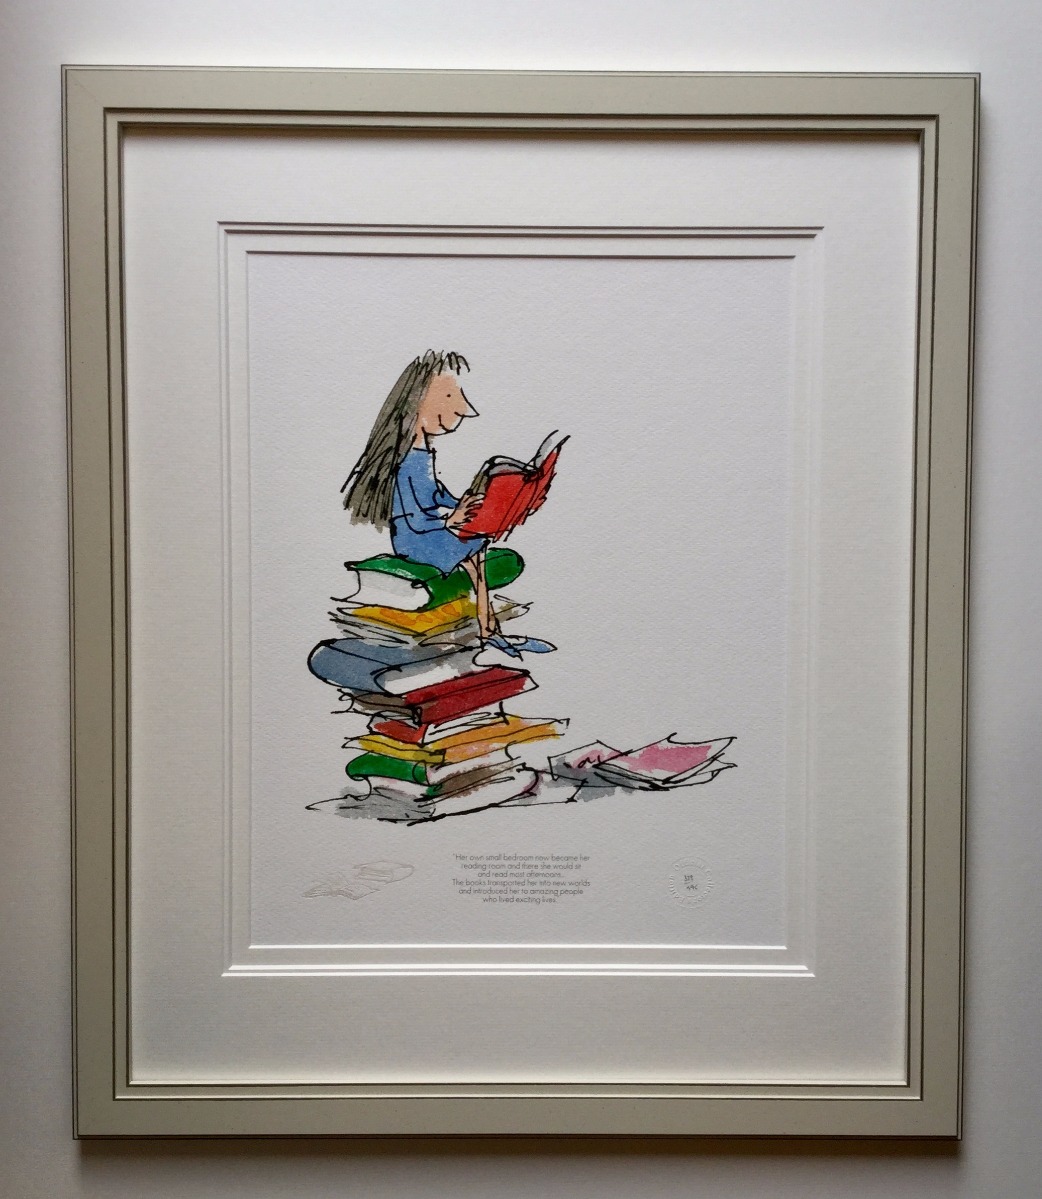 Matilda - Her Own Small Bedroom became Her Reading Room by Quentin Blake